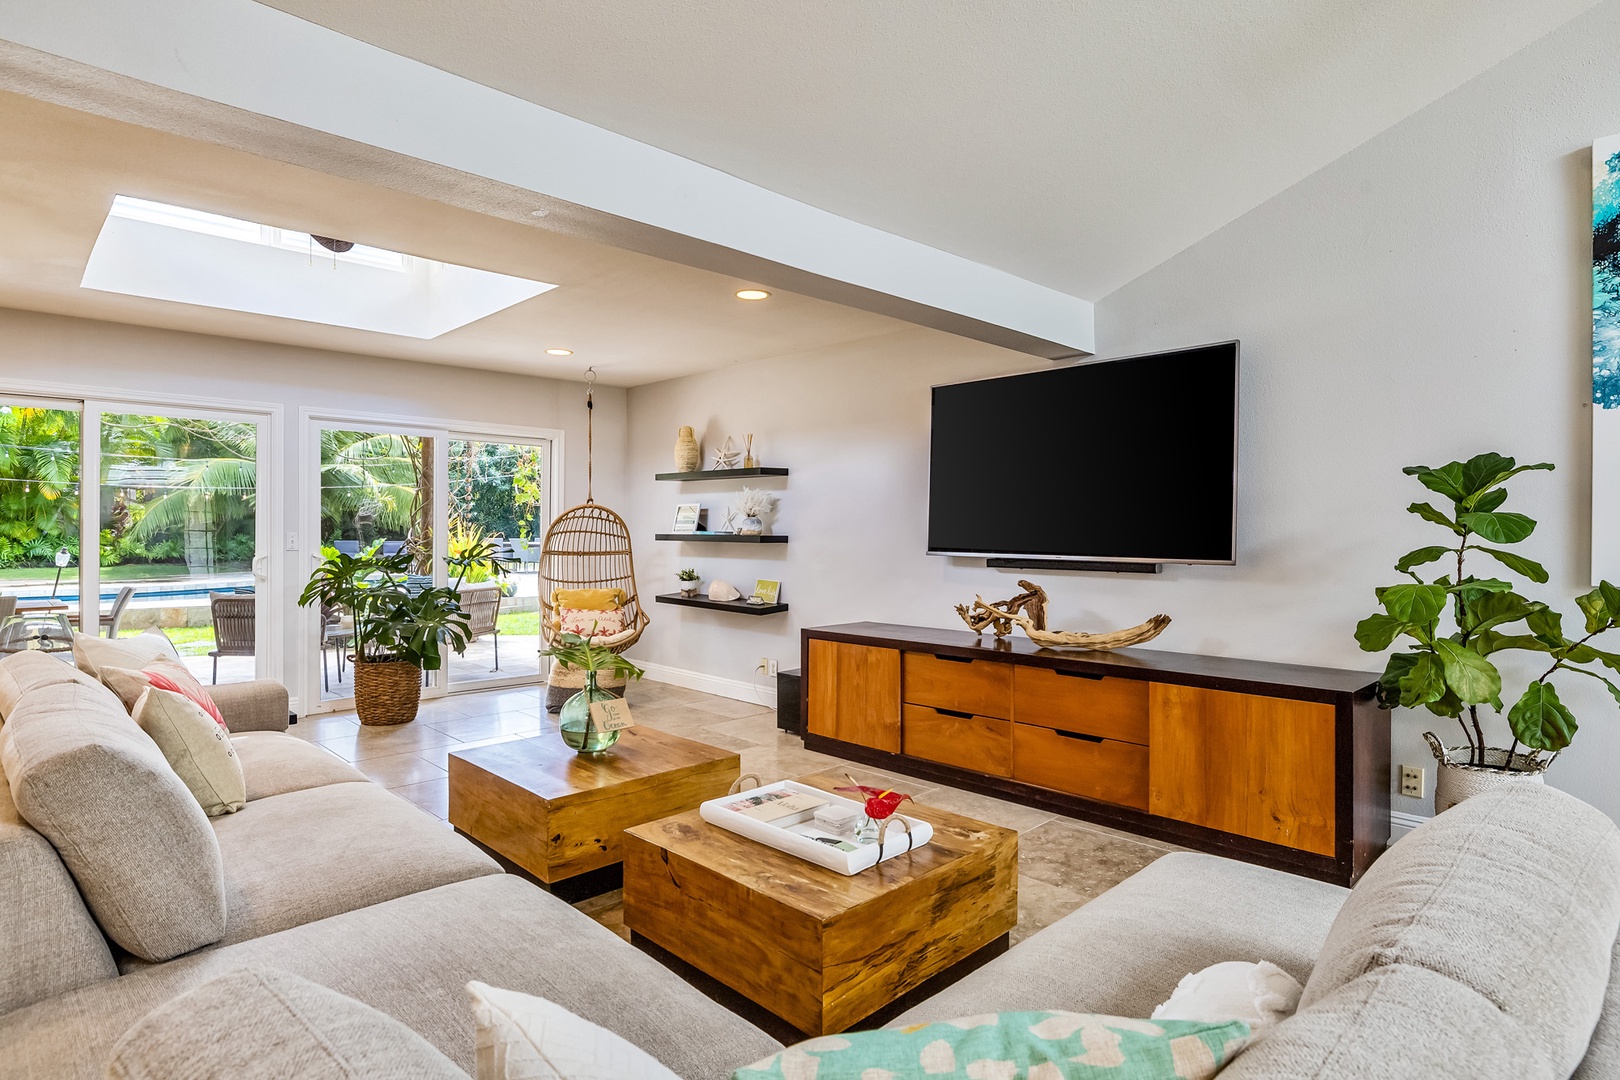 Honolulu Vacation Rentals, Hale Ho'omaha - Gather with loved ones for a movie night or catch up on your favorite TV shows